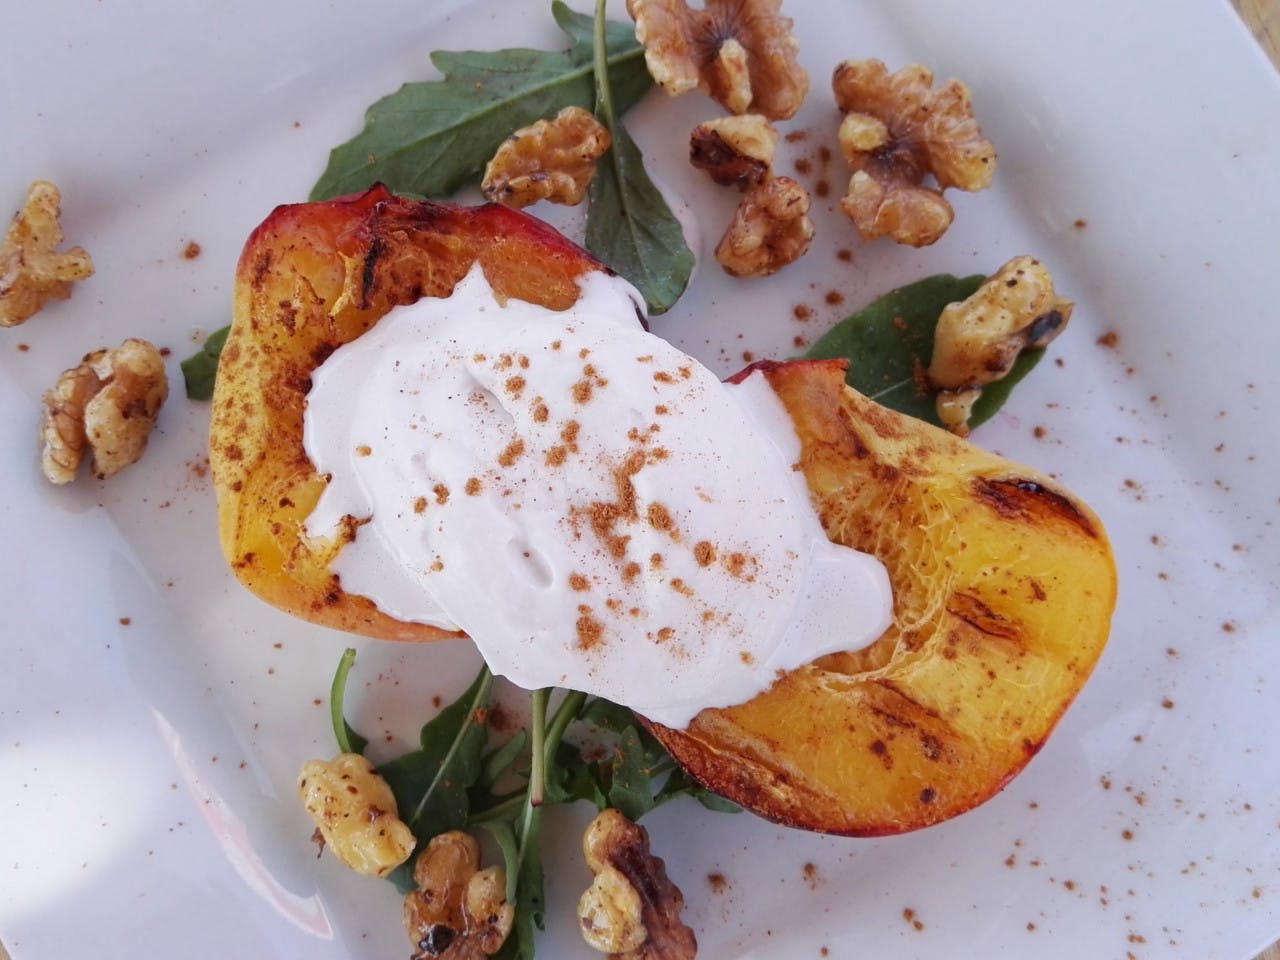 Grilled peach with coconut cream